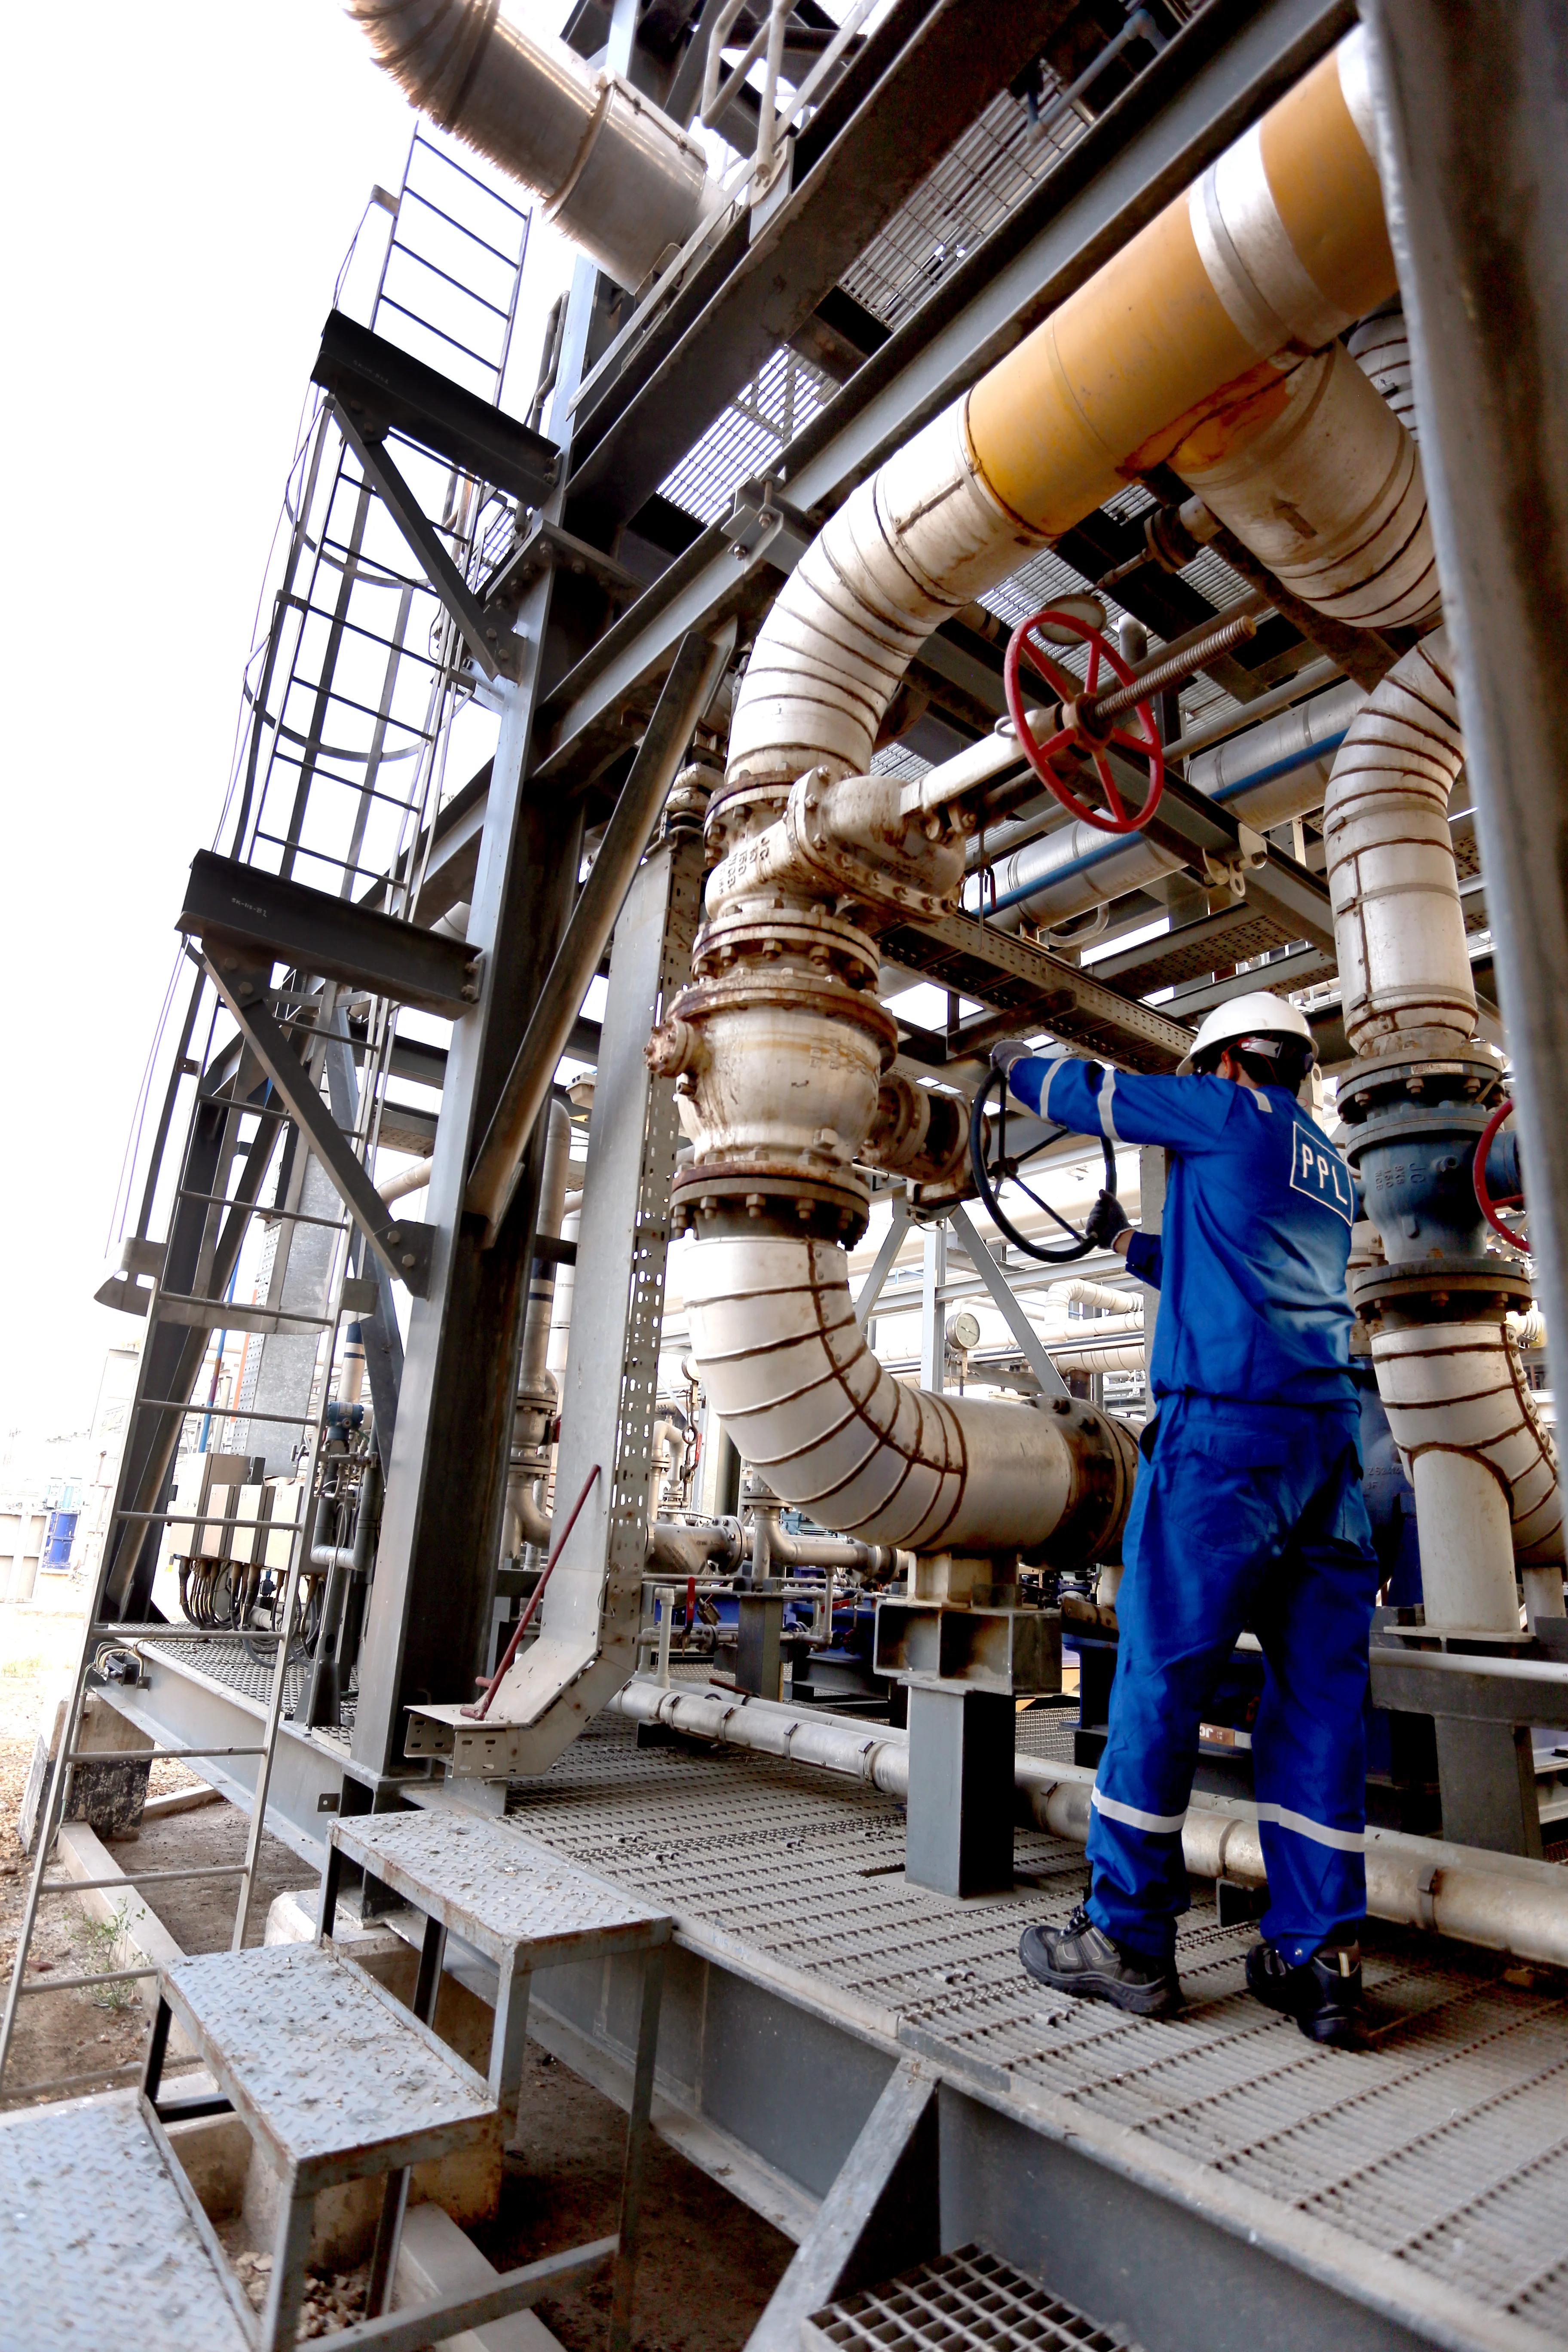 Process safety management is instrumental in pre-empting accidents and spill risks during oil and gas operations